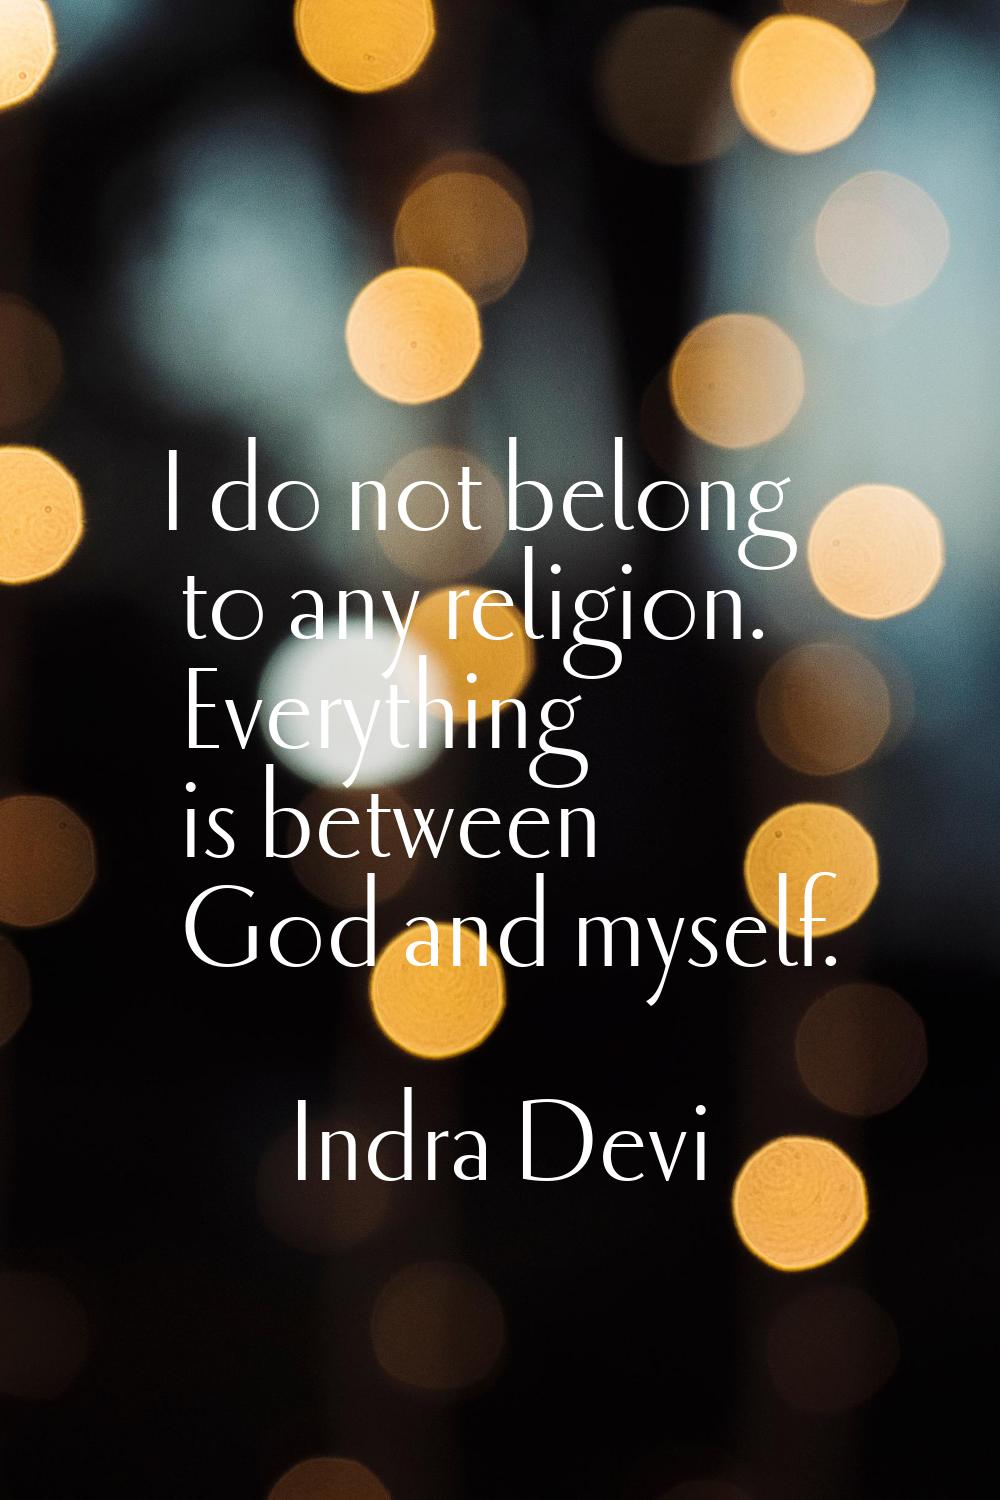 I do not belong to any religion. Everything is between God and myself.